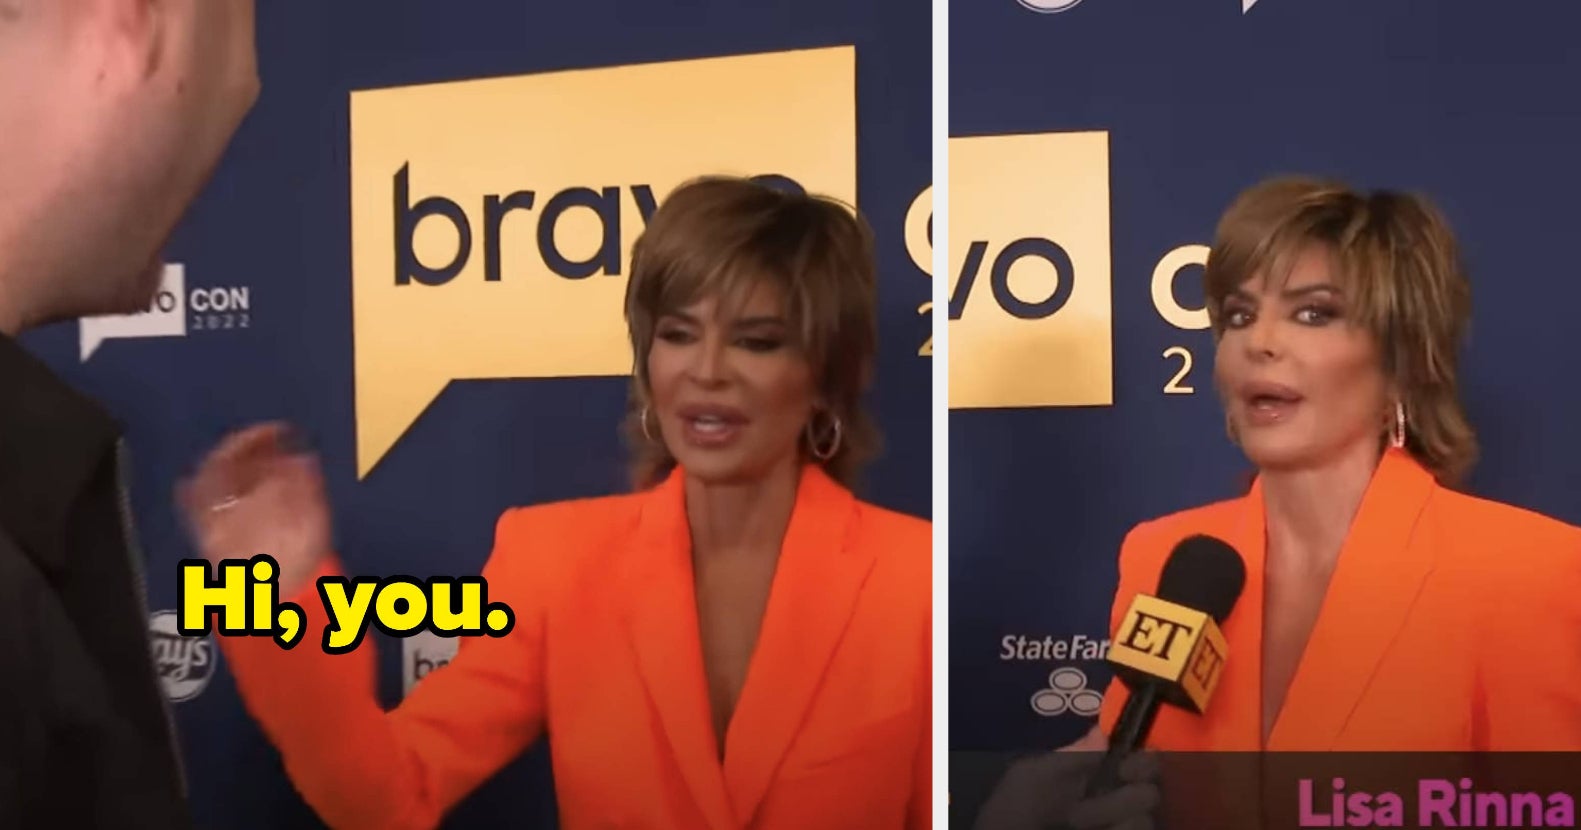 Lisa Rinna Was Interviewed On The Red Carpet By Someone She Had Blocked, And It's Super Awkward